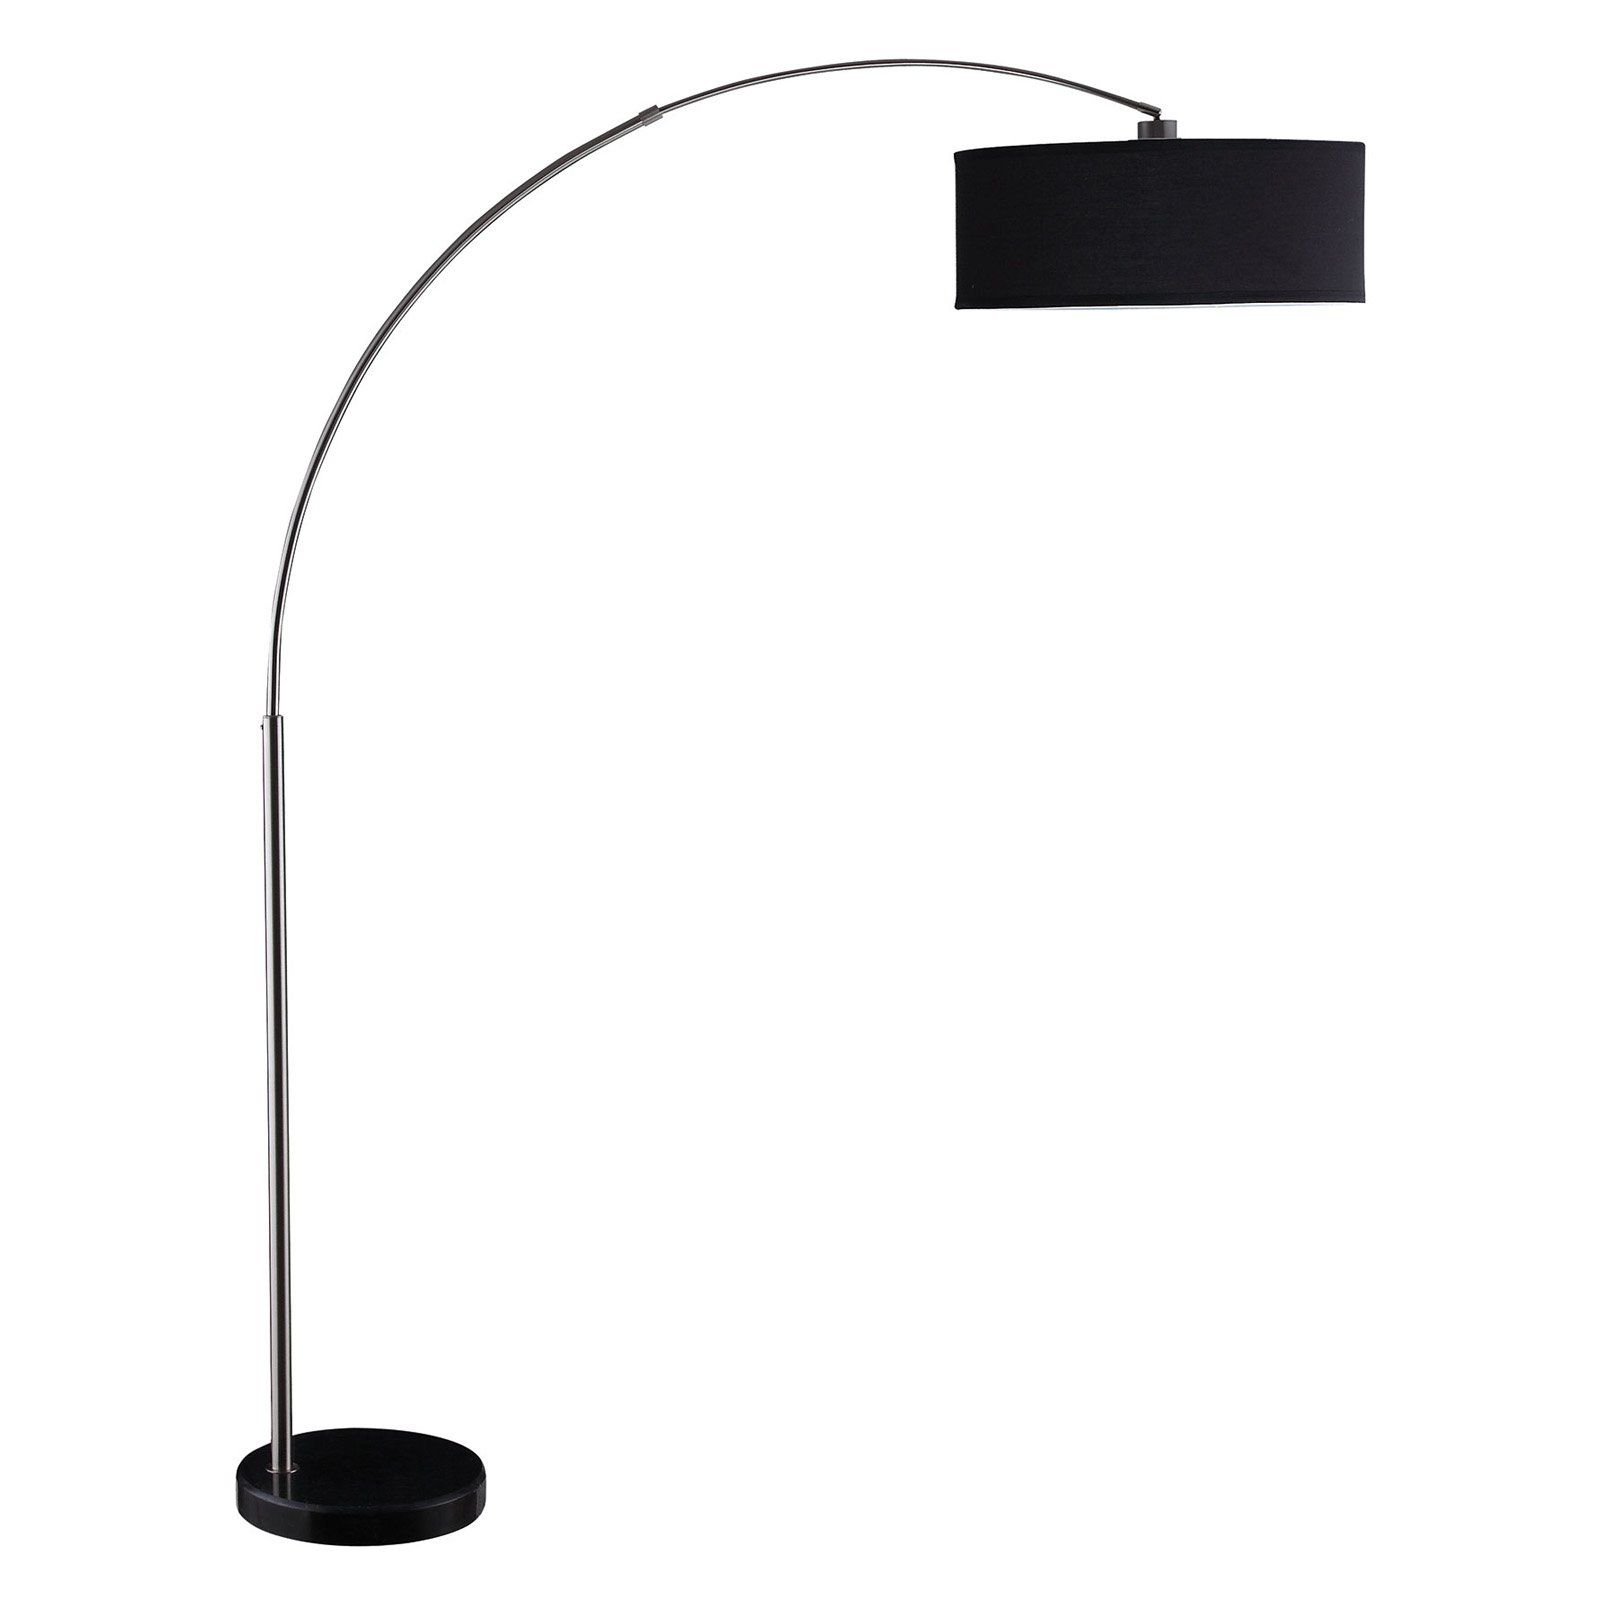 Coaster Hanging Floor Lamp Black And Chrome Color:black,finish:chrome /  Black,style:contemporary – Walmart Regarding Black Floor Lamps (View 11 of 20)